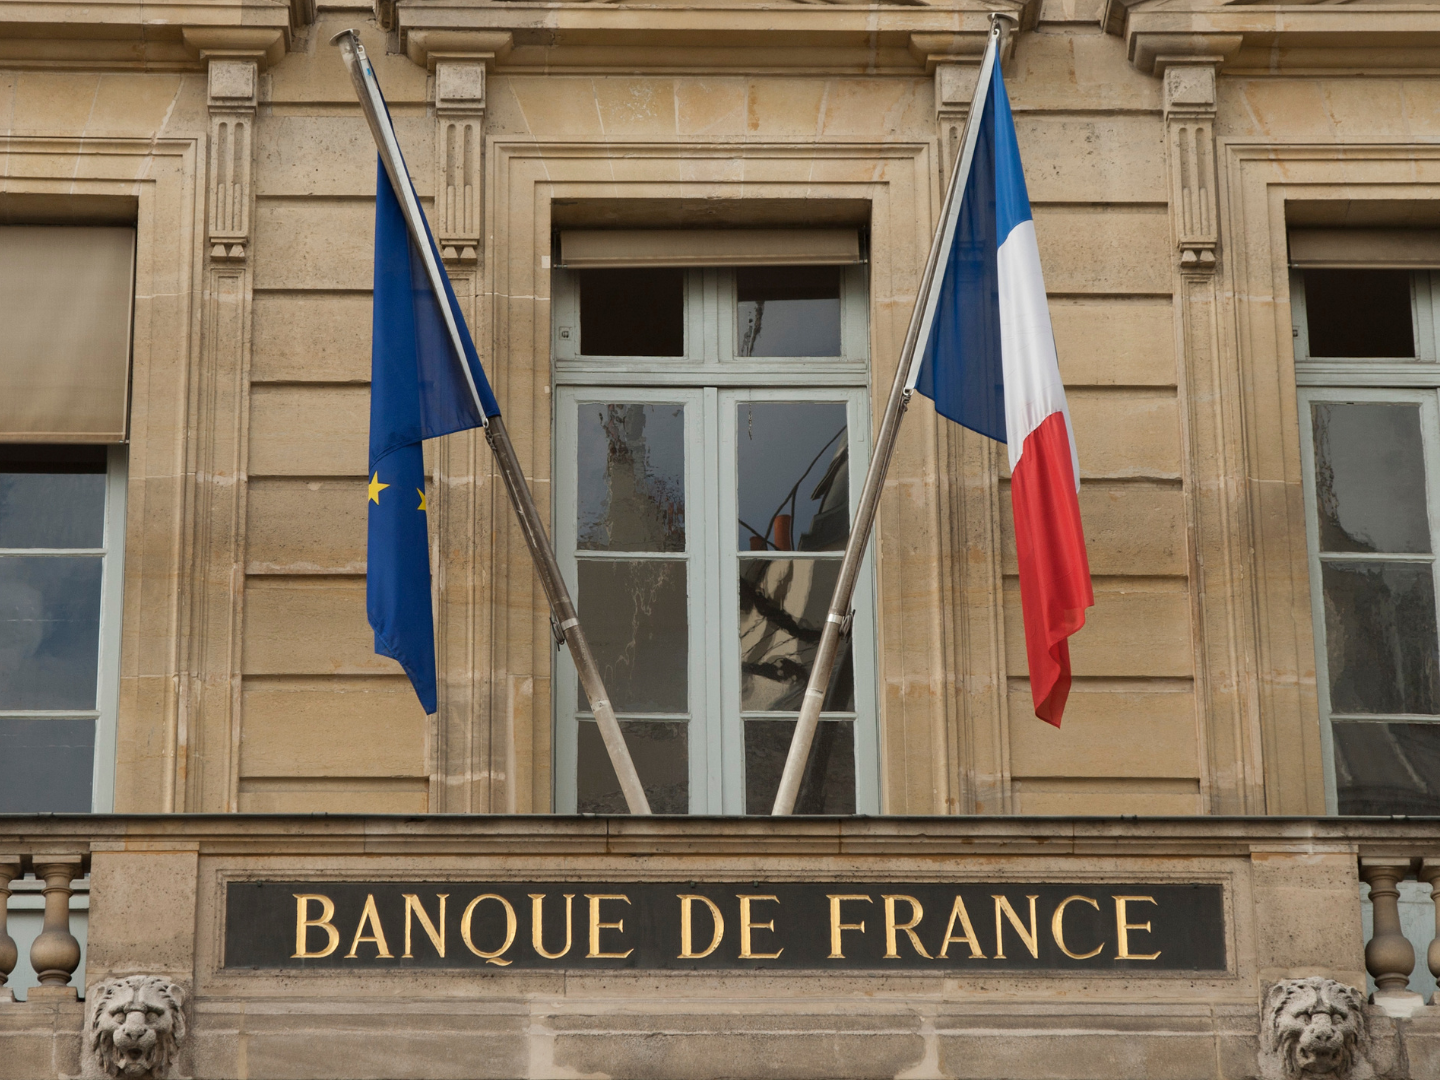 Opening a bank account in France - France Guide 